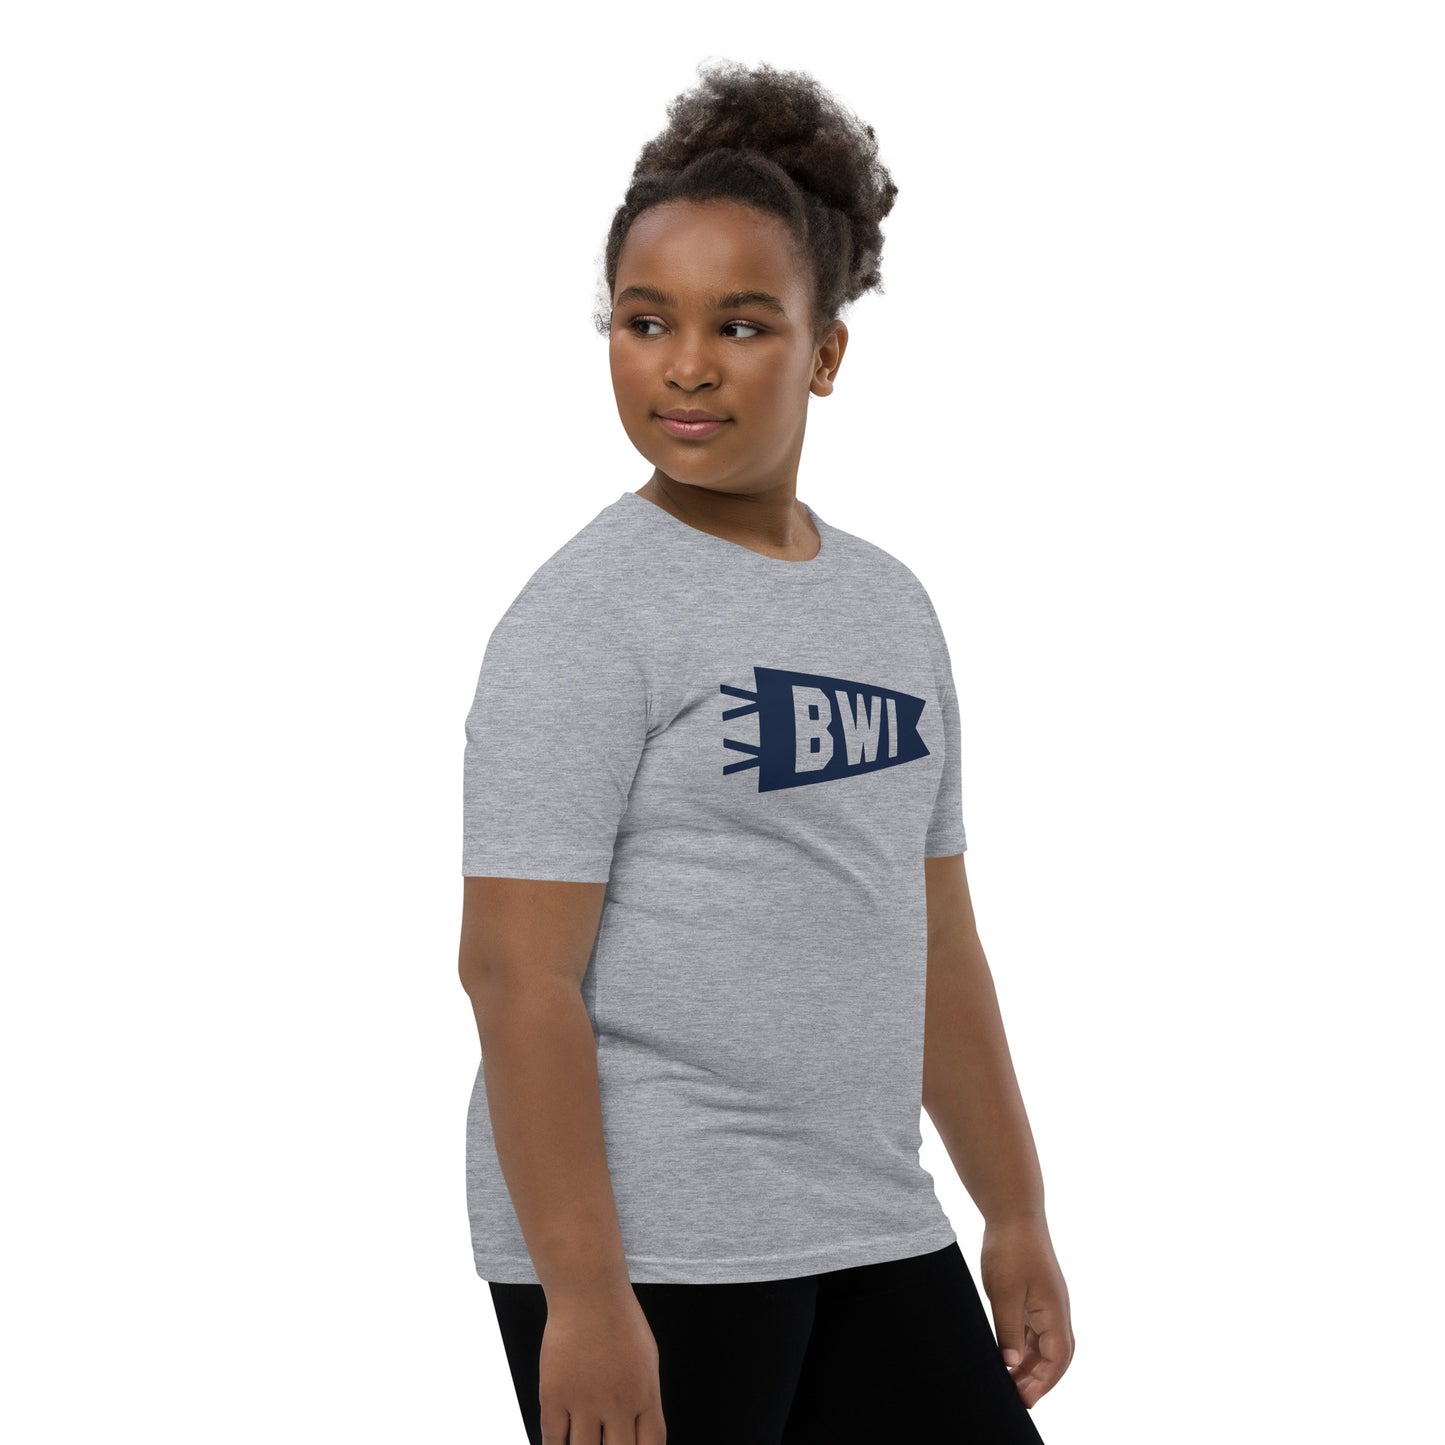 Kid's Airport Code Tee - Navy Blue Graphic • BWI Baltimore • YHM Designs - Image 03